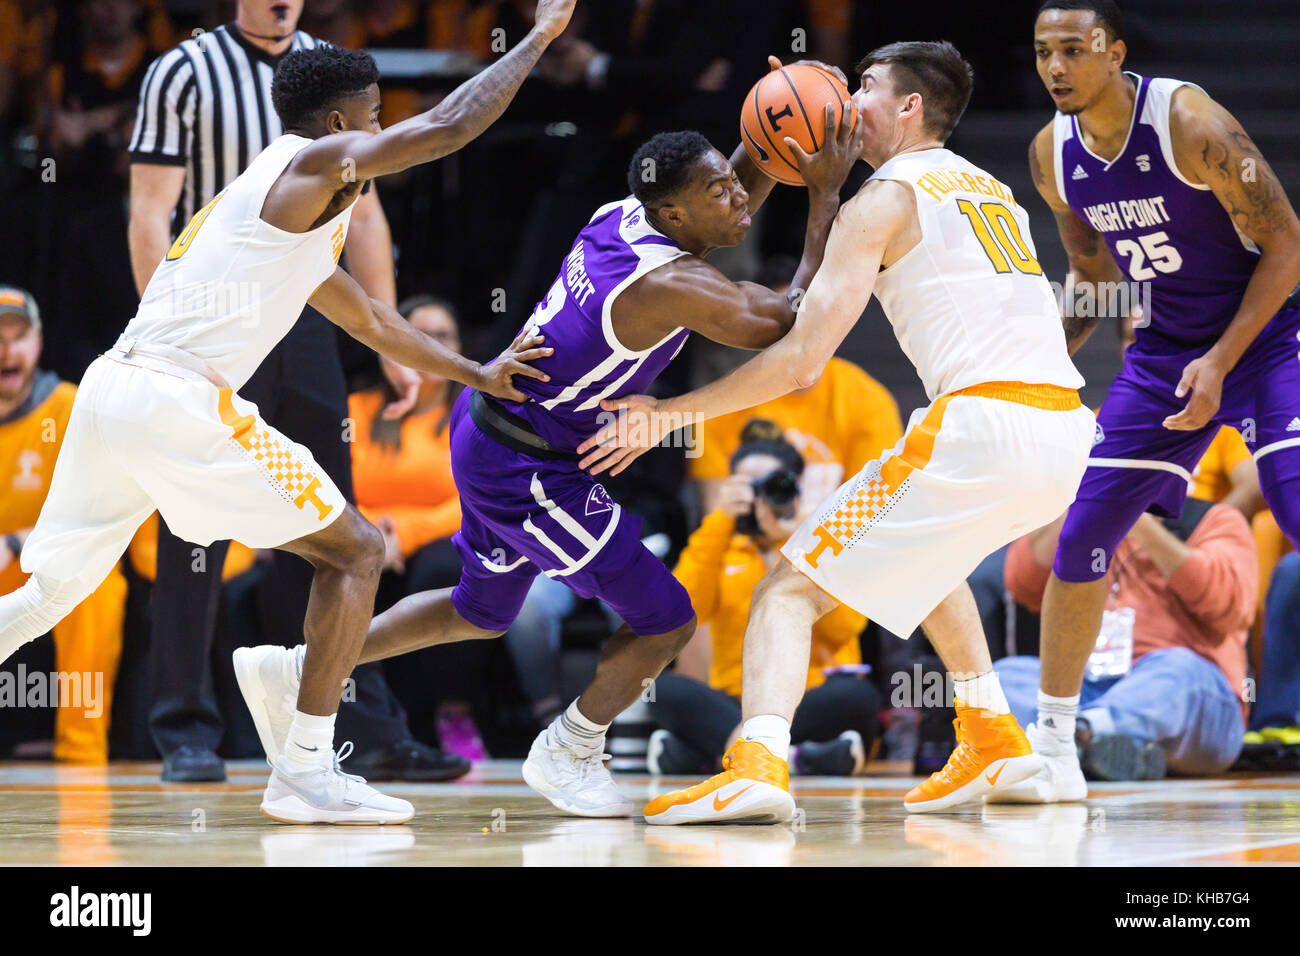 University of Tennessee, Tennessee November 14, 2017: Jamal Wright #3 of the High Point Panthers drives to the basket against John Fulkerson #10 of the Tennessee Volunteers during the NCAA basketball game between the University of Tennessee Volunteers and the High Point University Panthers at Thompson Boling Arena in Knoxville TN Tim Gangloff/CSM Stock Photo